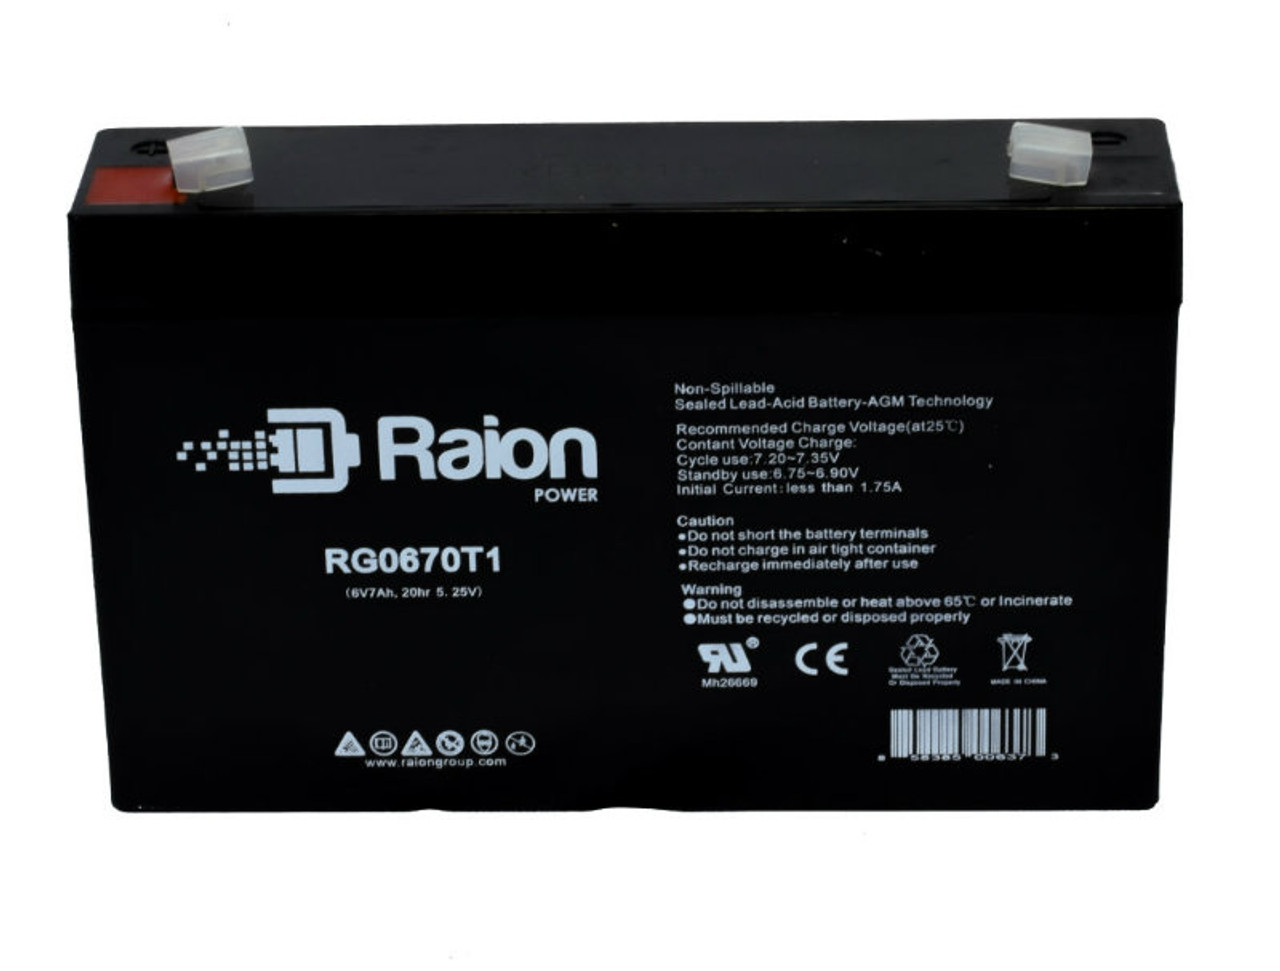 Raion Power RG0670T1 Replacement Battery Cartridge for Technacell TC670